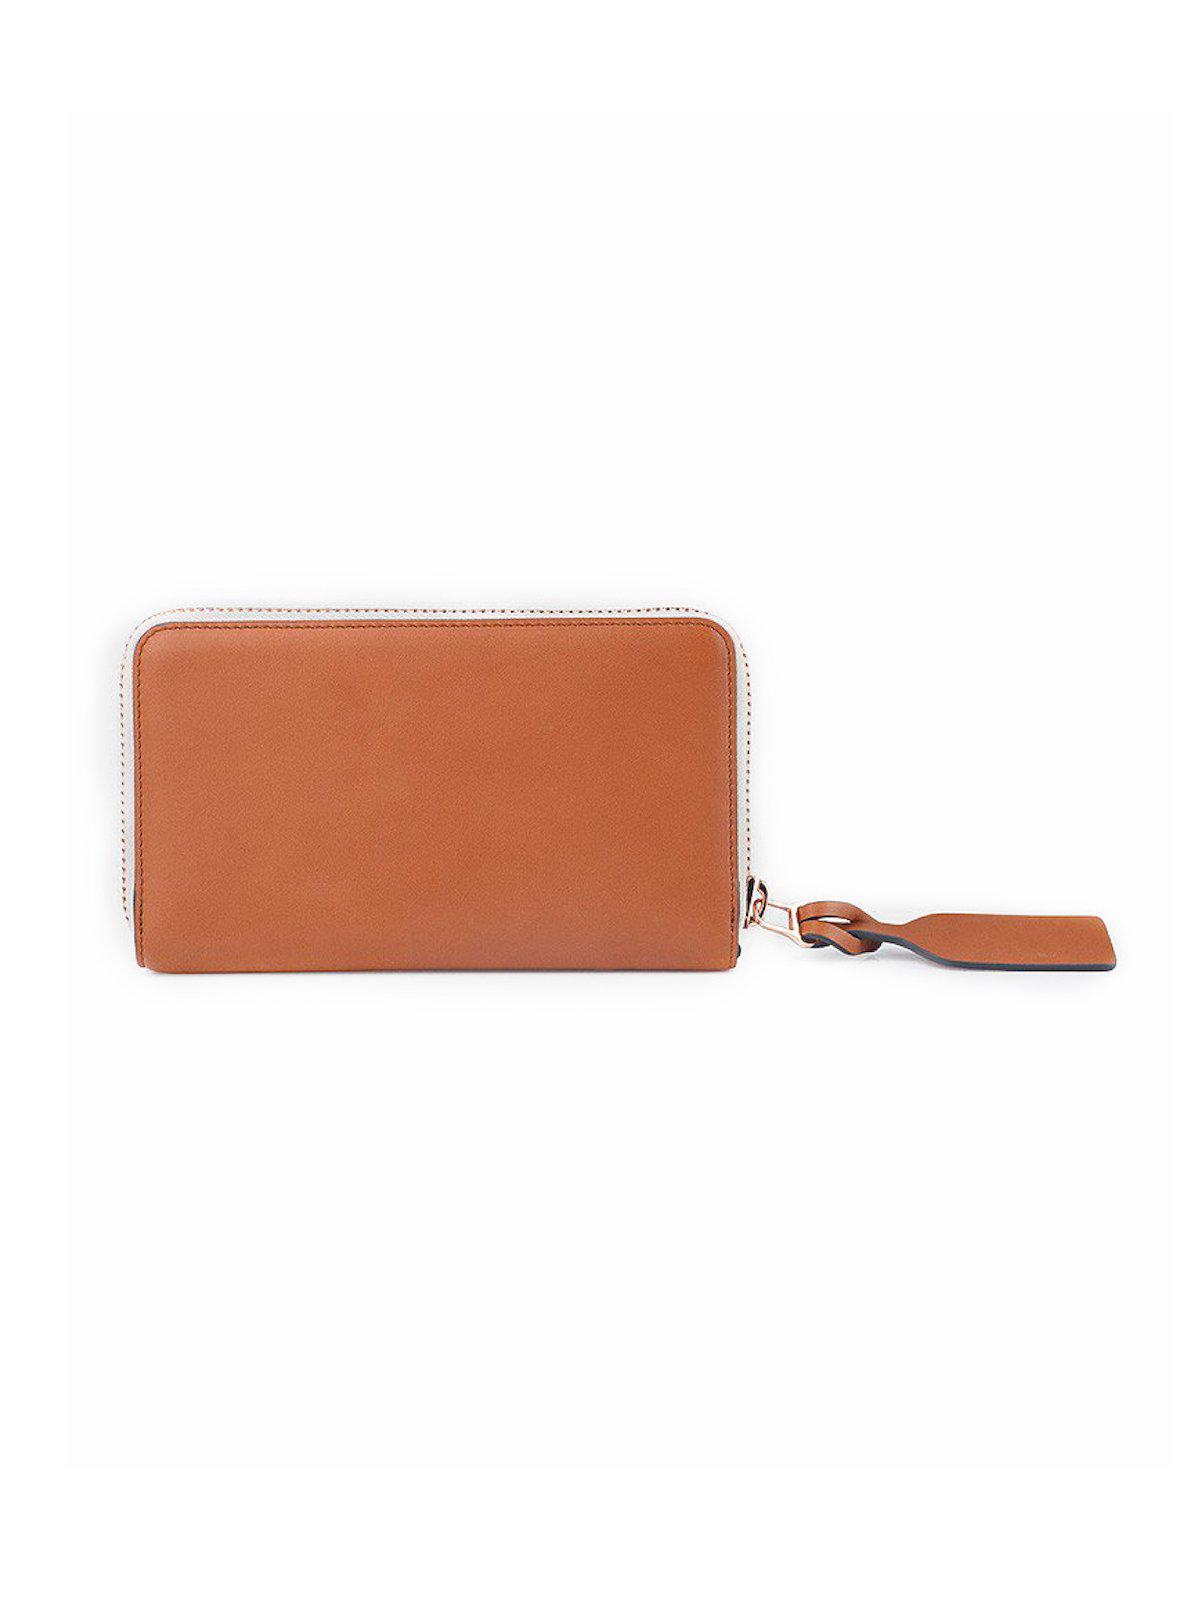 The Horse Block Wallet Tan - MORE by Morello Indonesia